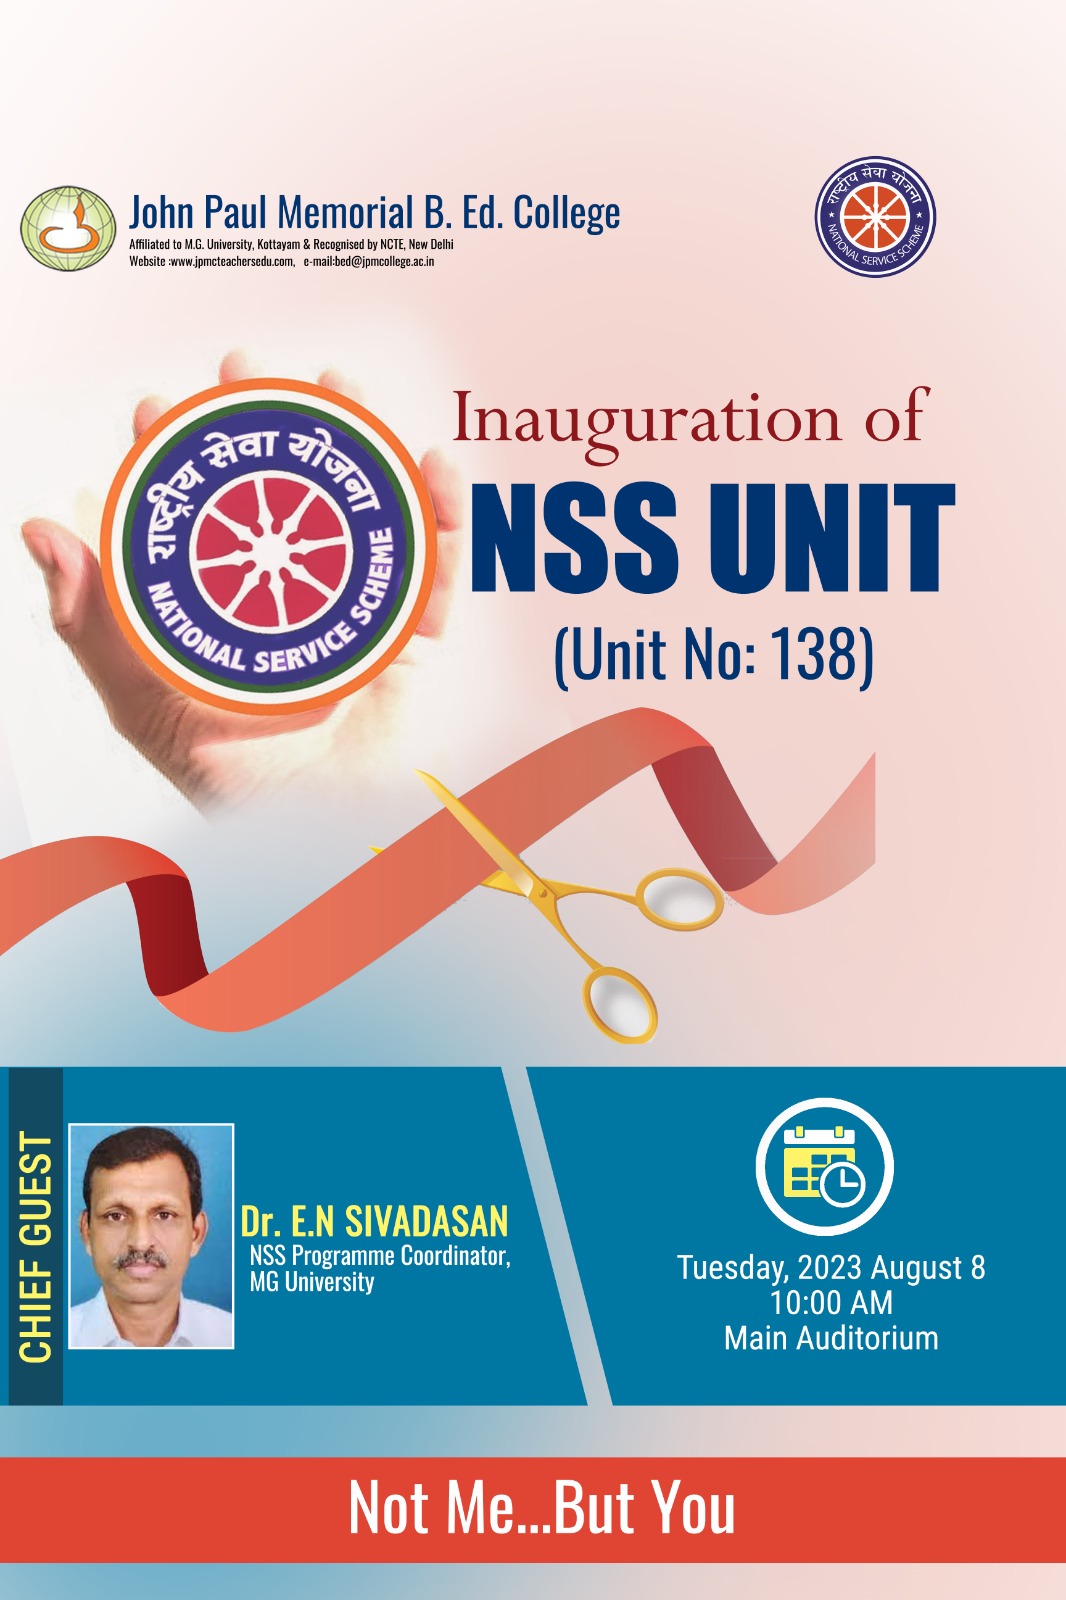 Inauguration of NSS UNIT